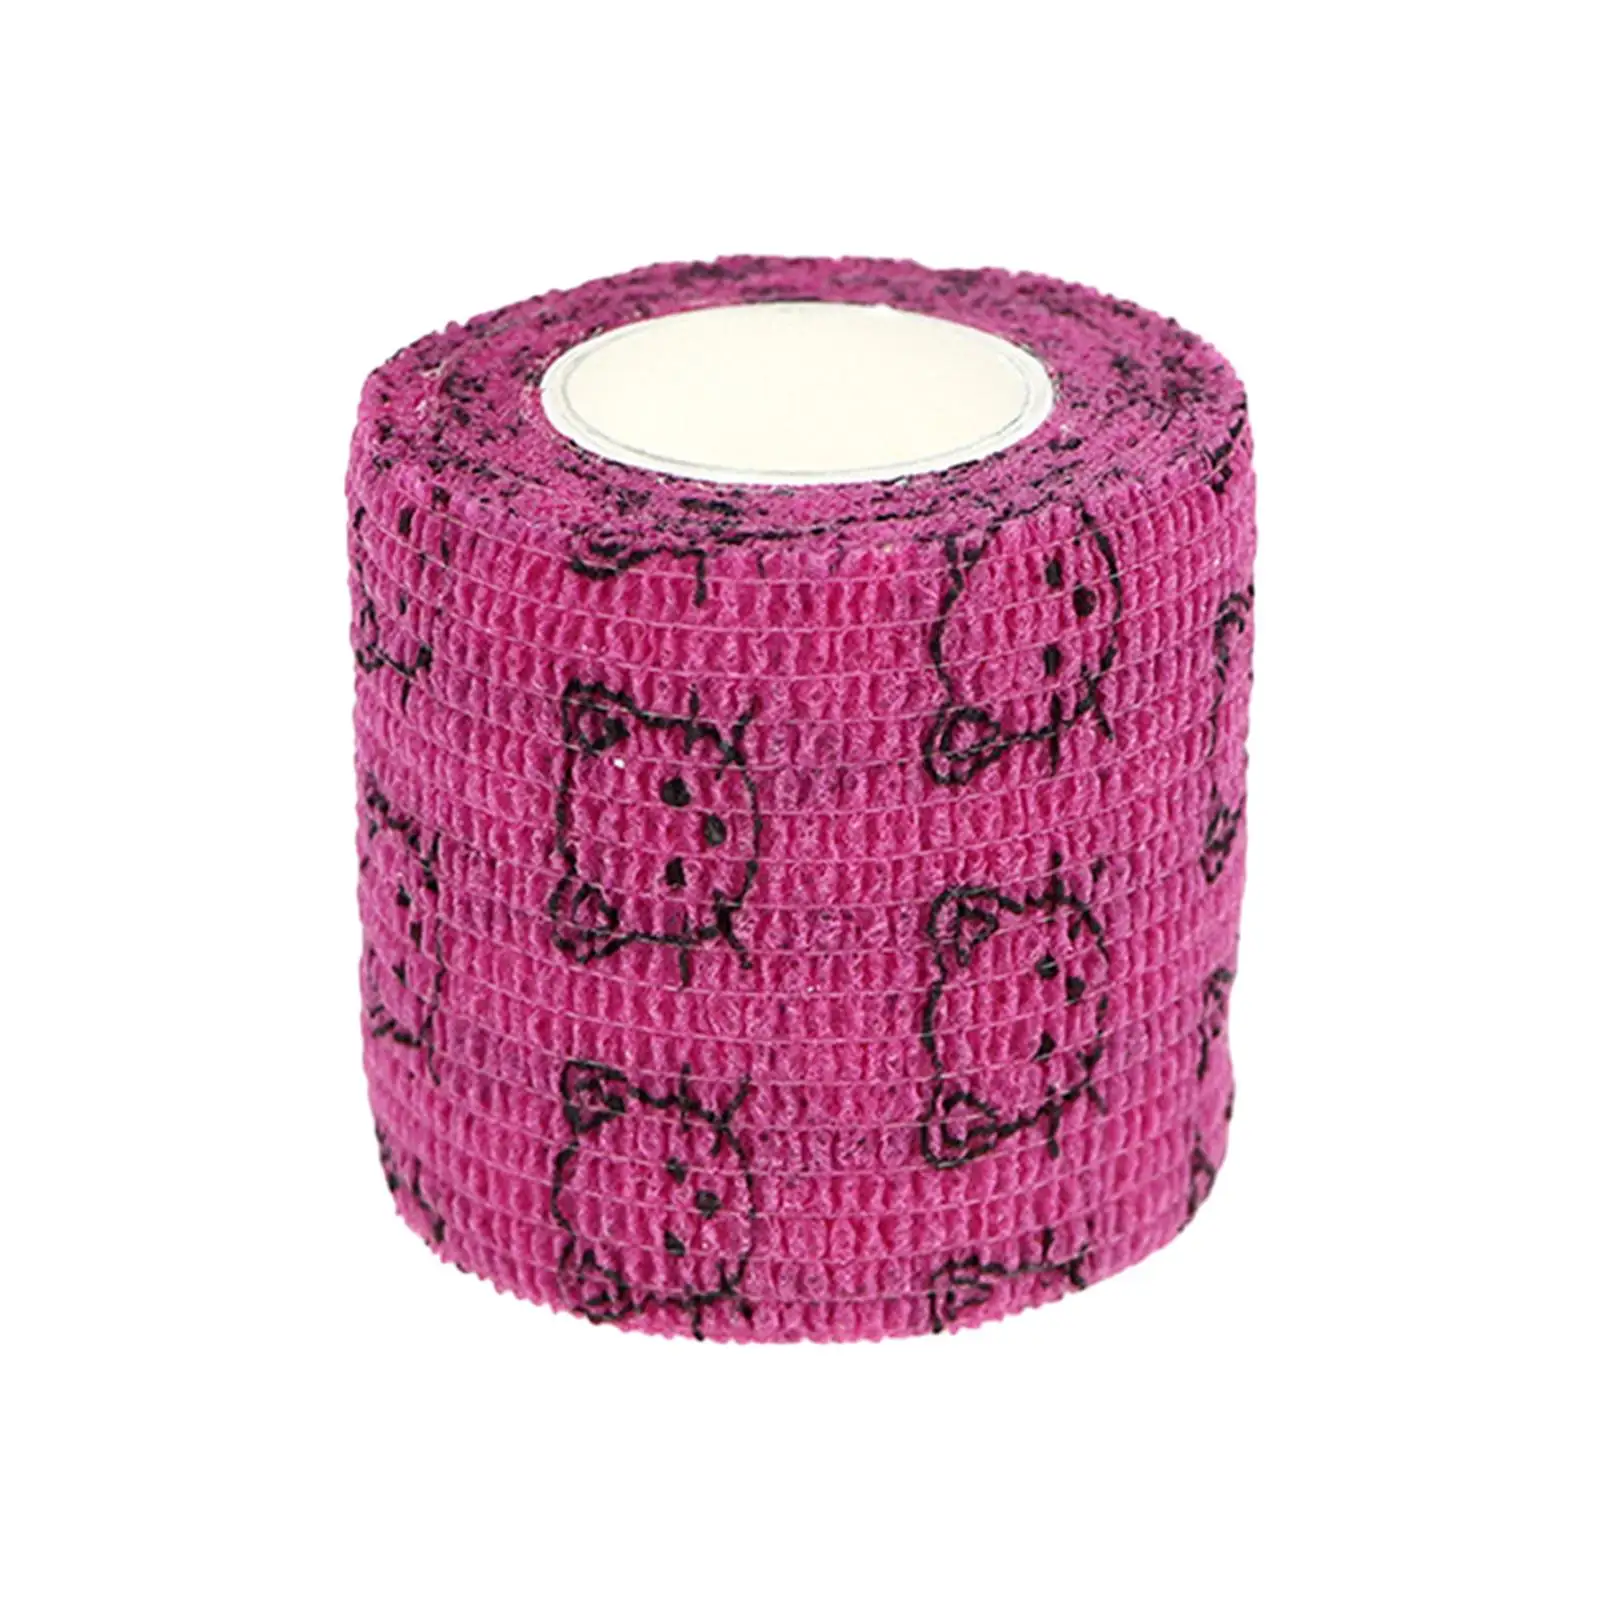 Self Adhesive Elastic Bandage First Aid Supplies Anti Wear Cohesive Bandages for Pet Small Animal Horse Legs Wrist Ankle Sports